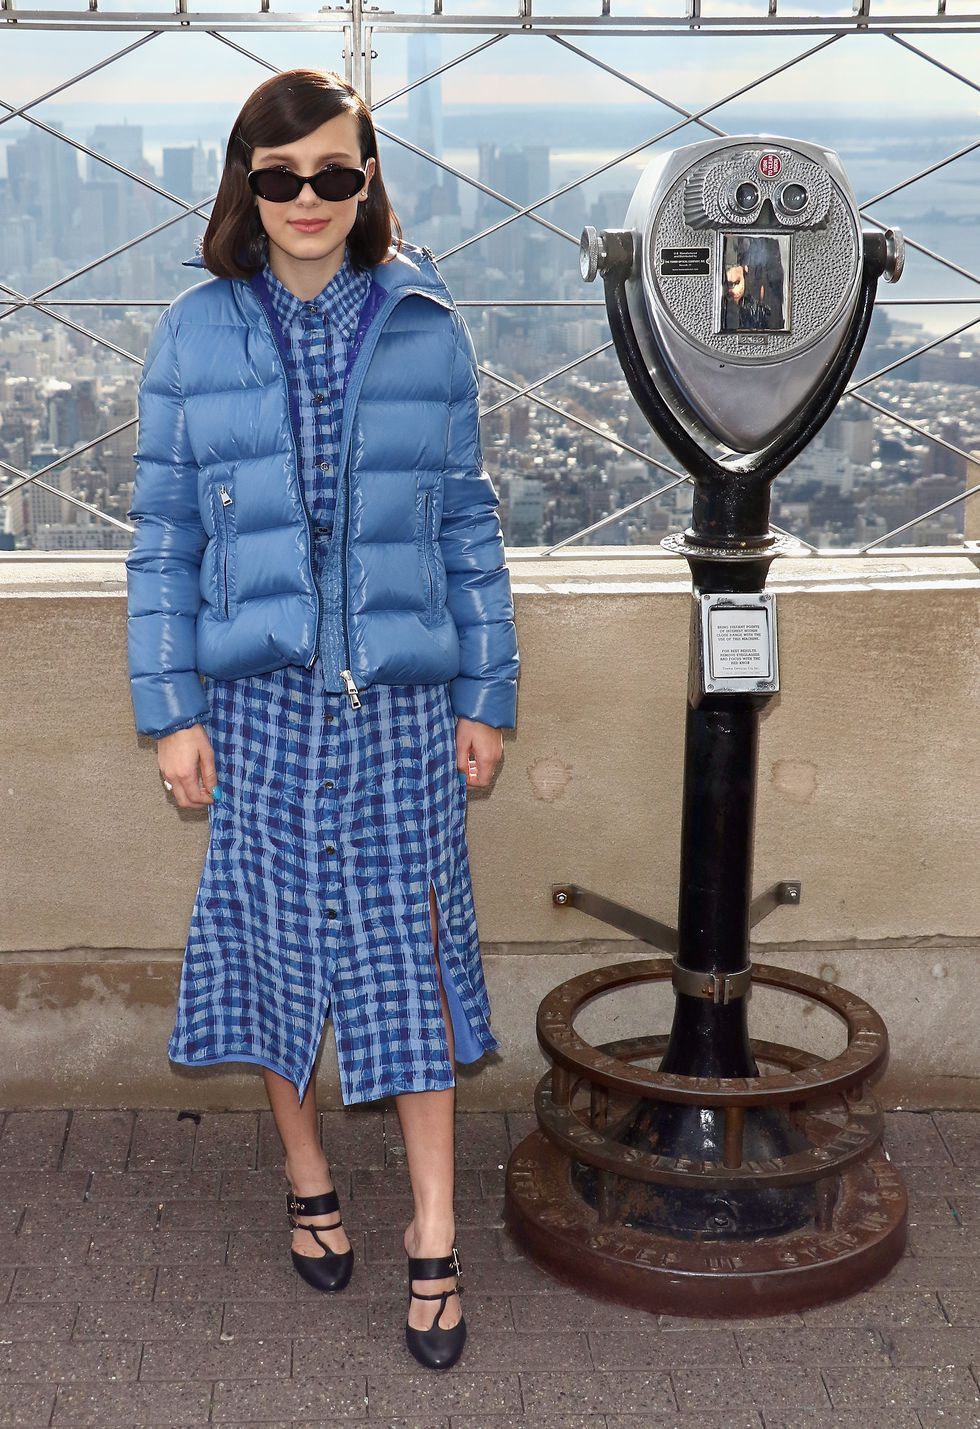 Millie Bobby Brown Lights The Empire State Building In Honor Of Unicef And World Children's Day